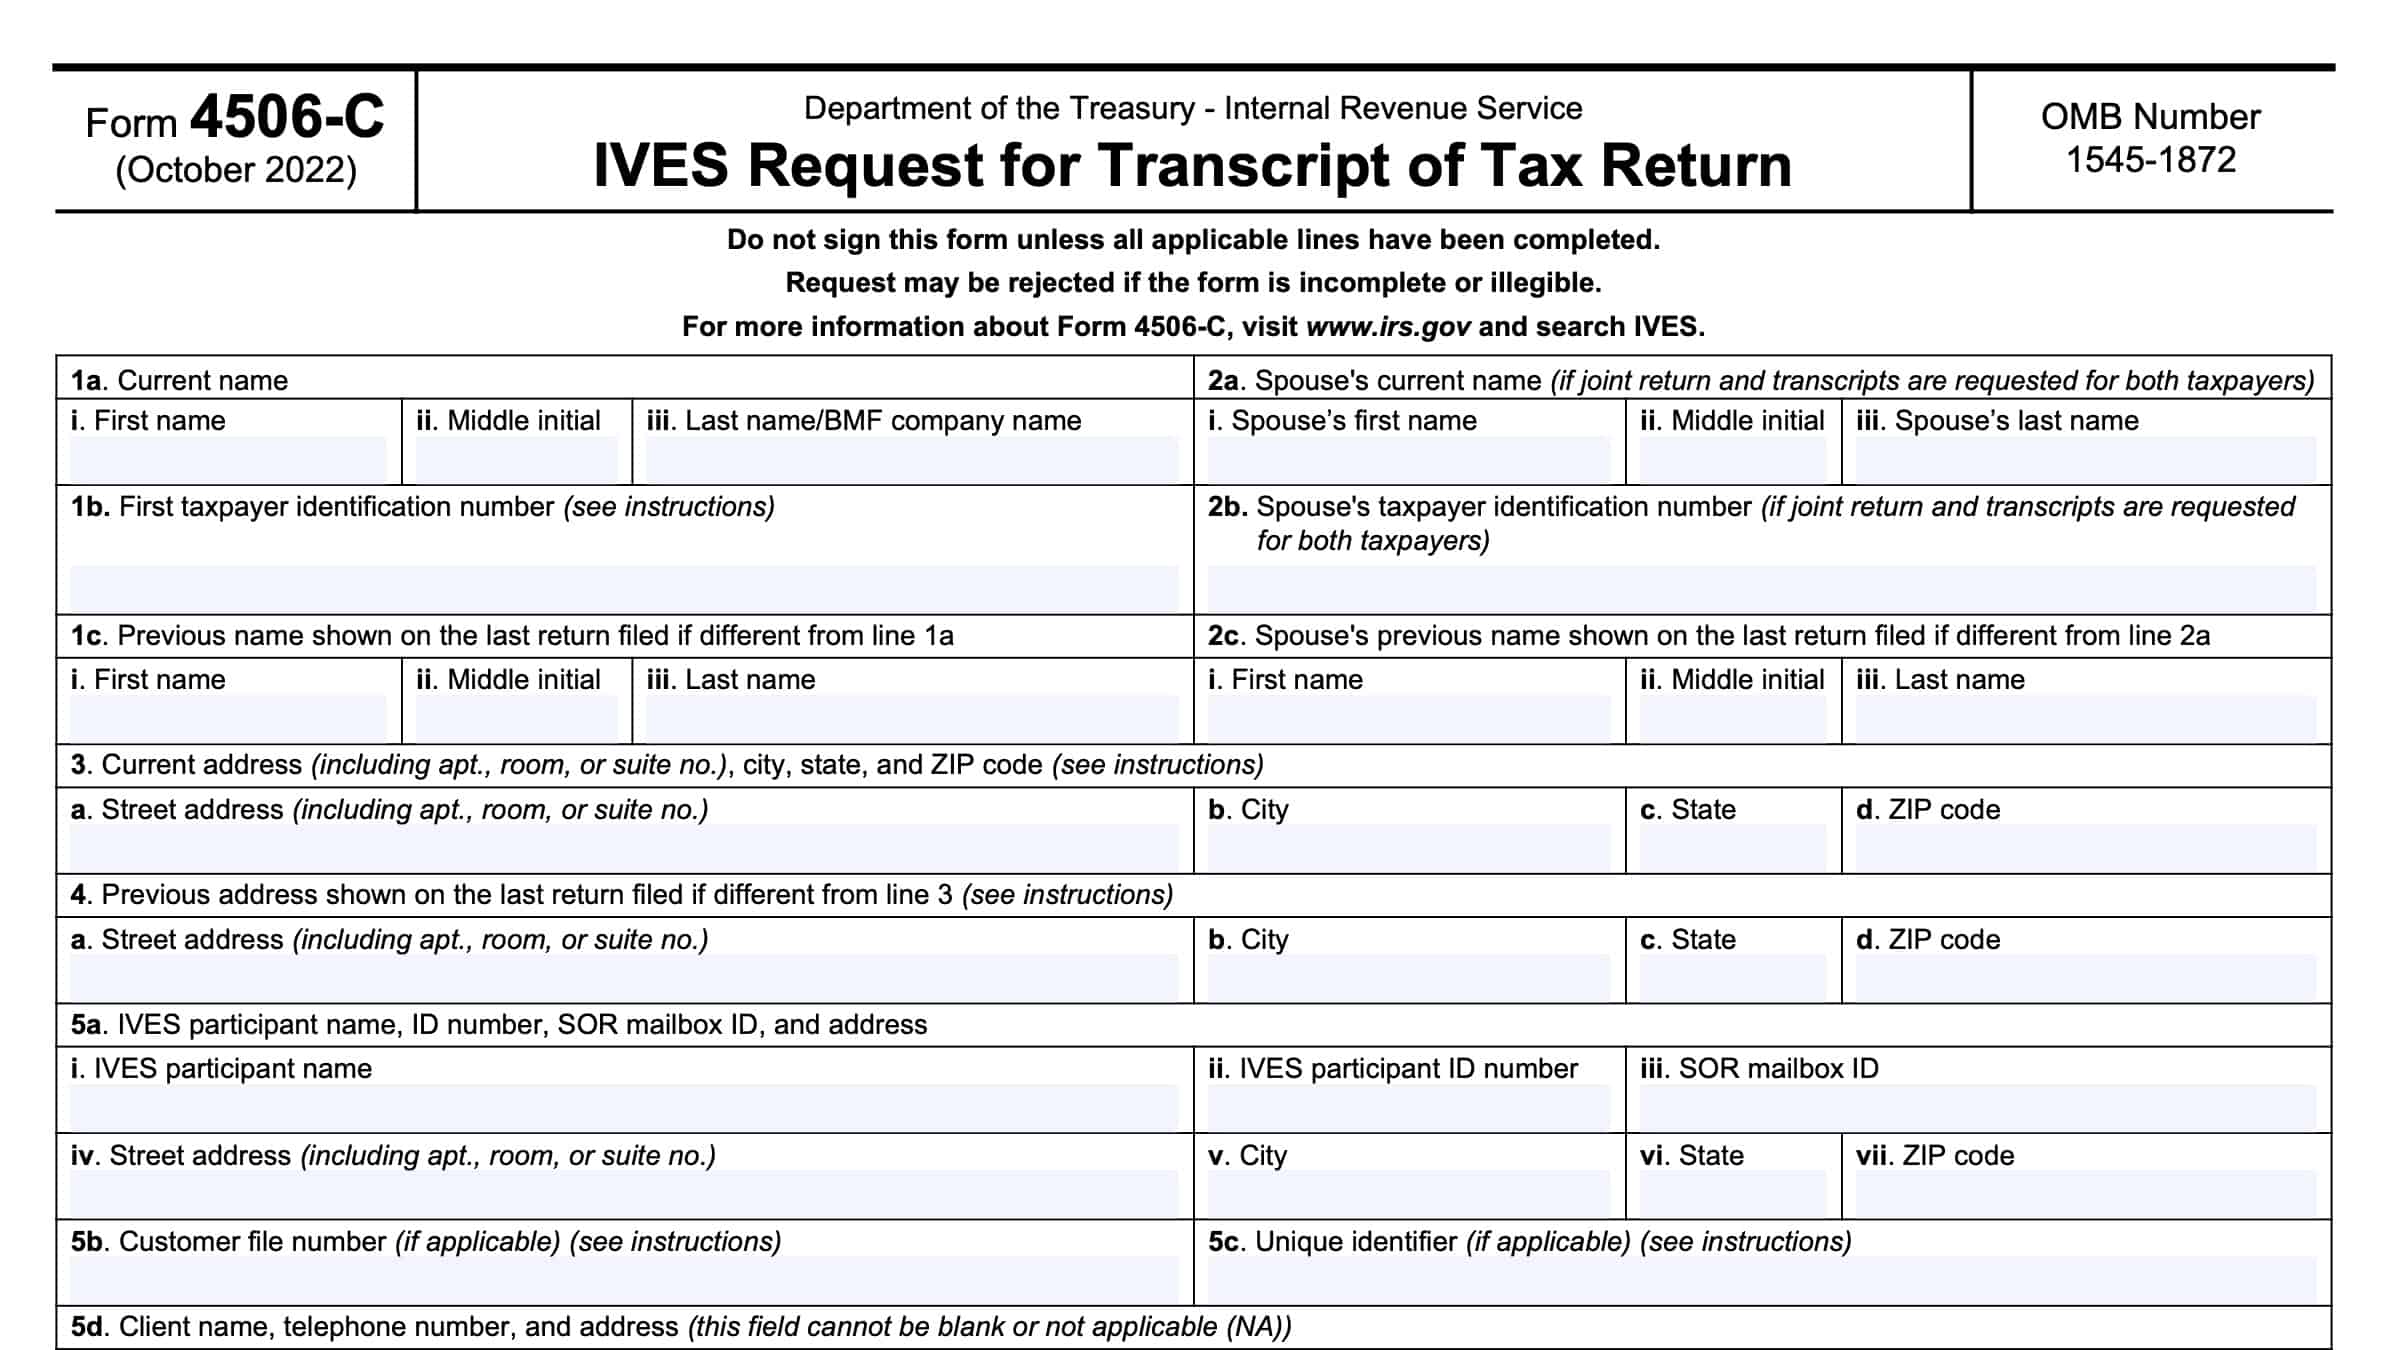 irs-form-4506-c-instructions-ives-request-for-tax-transcripts